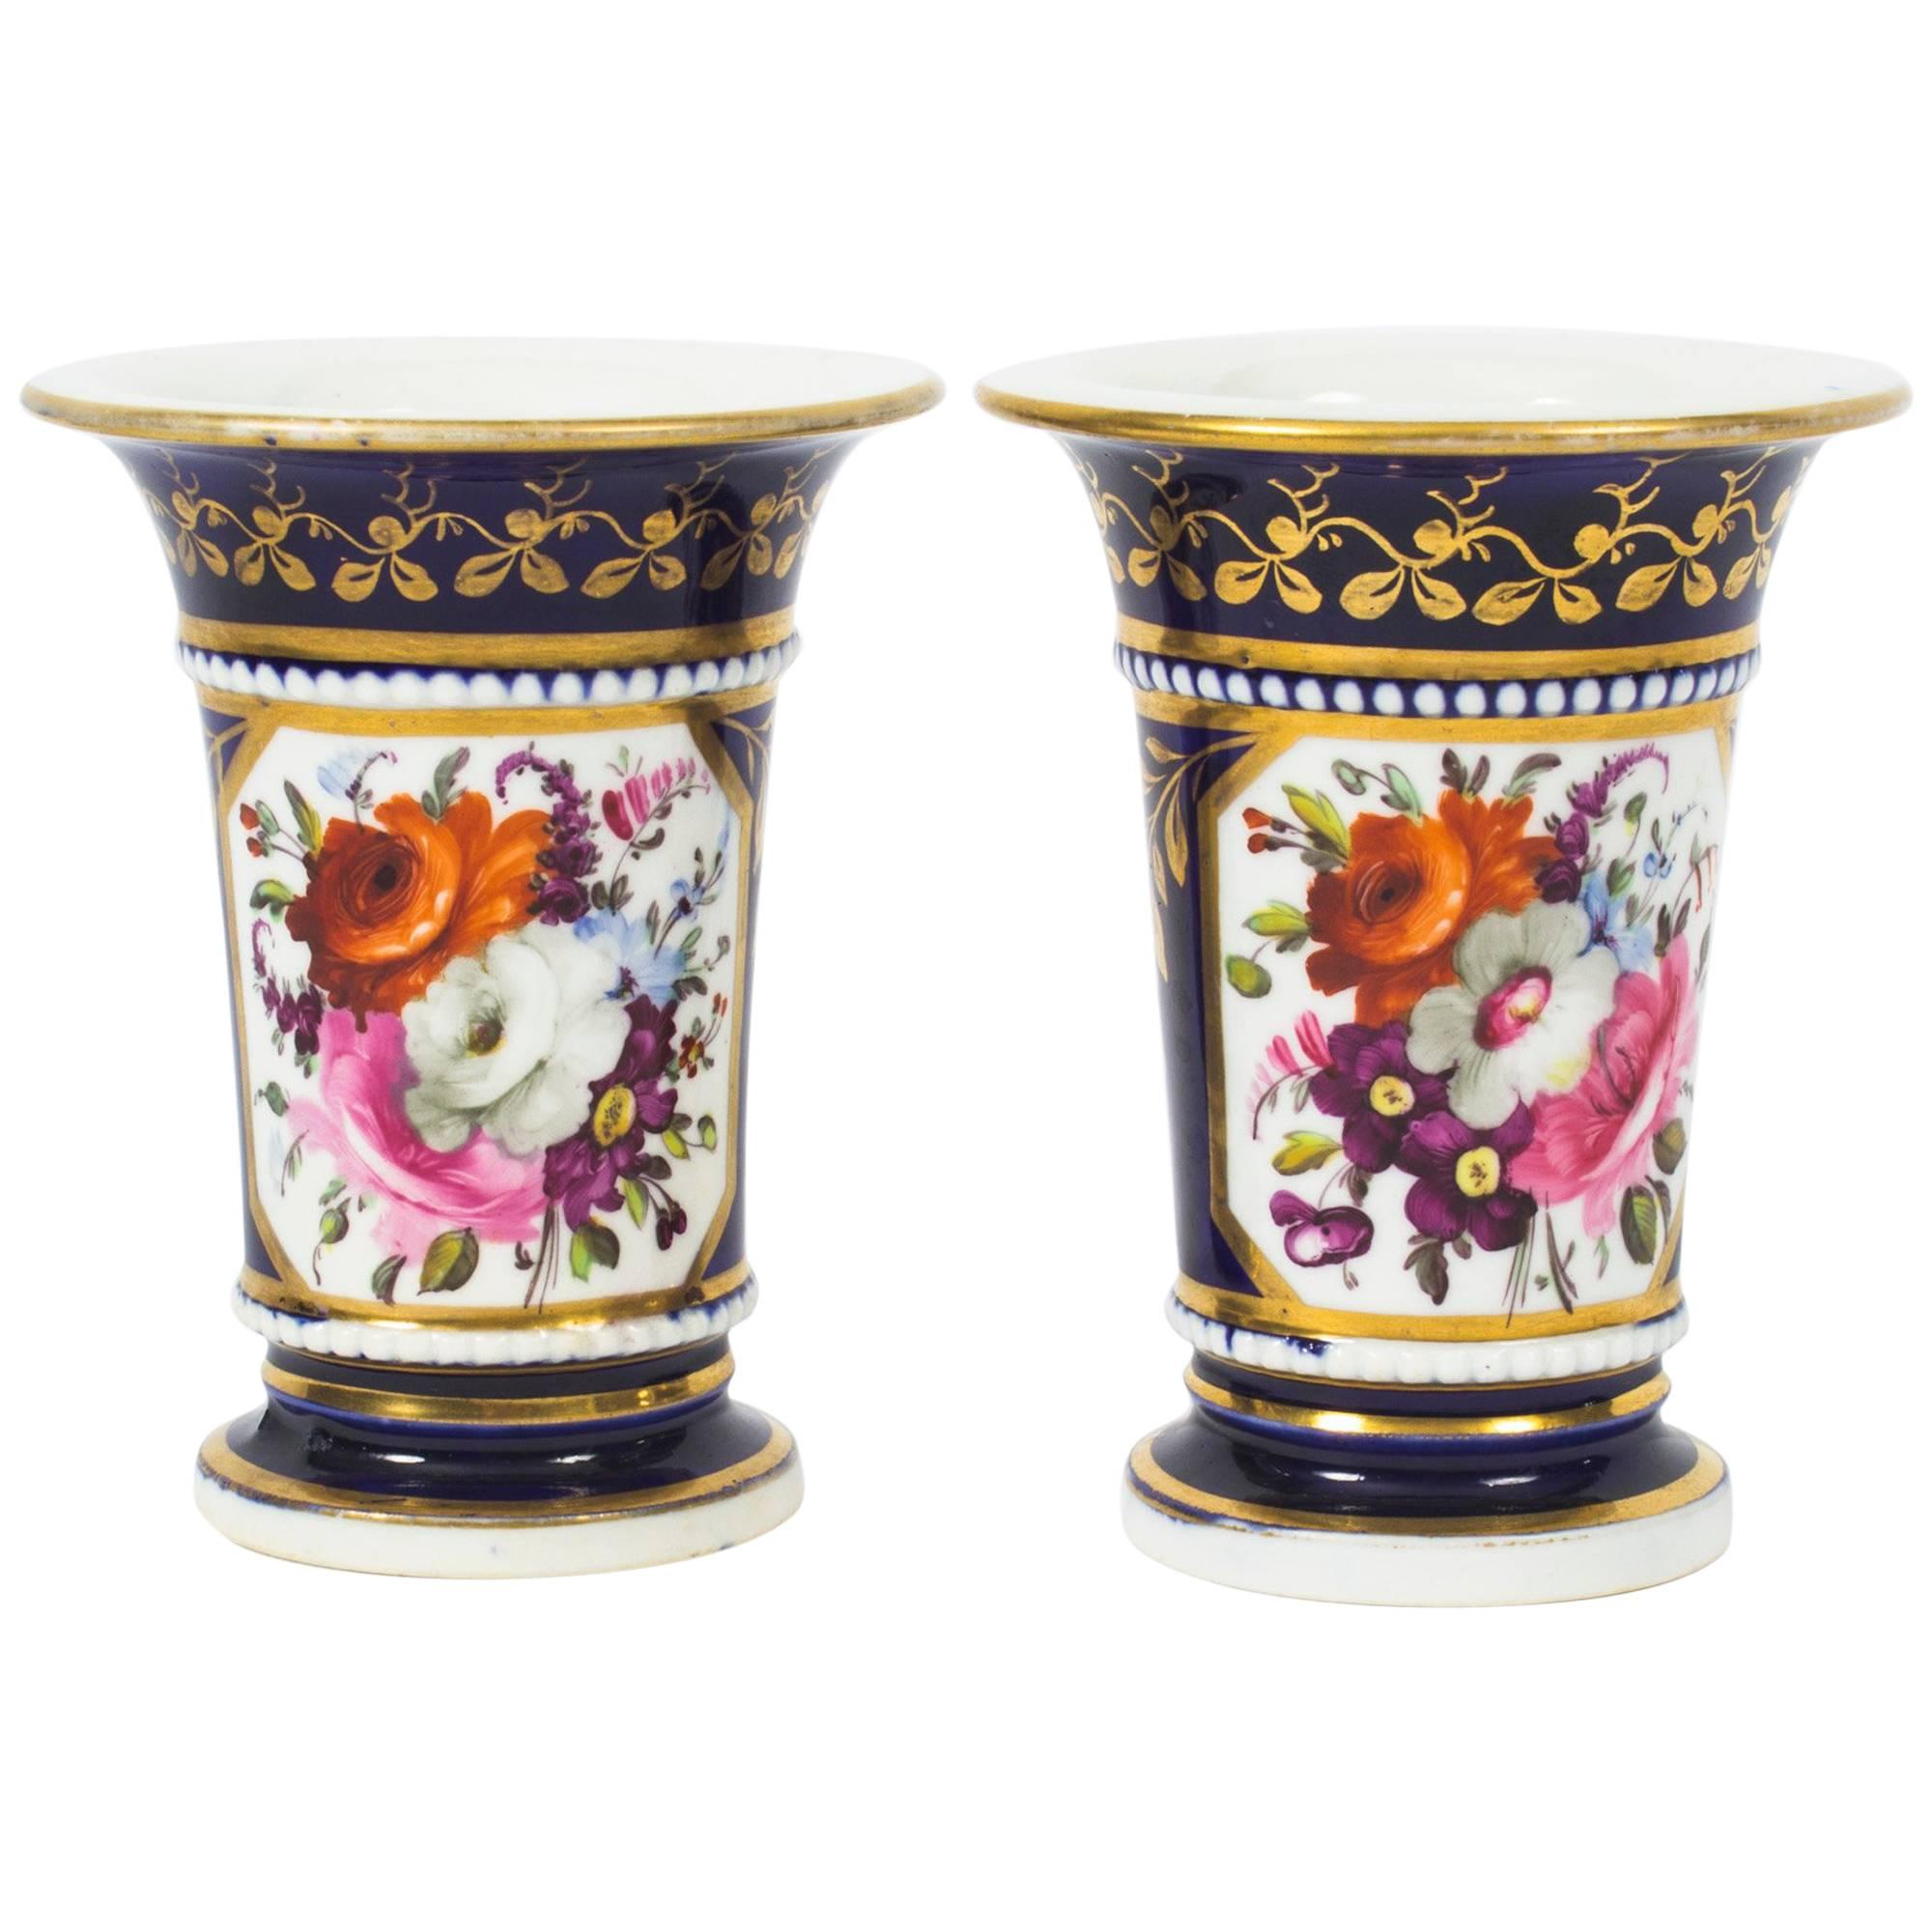 Antique Pair of Royal Blue Regency English Spill Vases, Early 19th Century